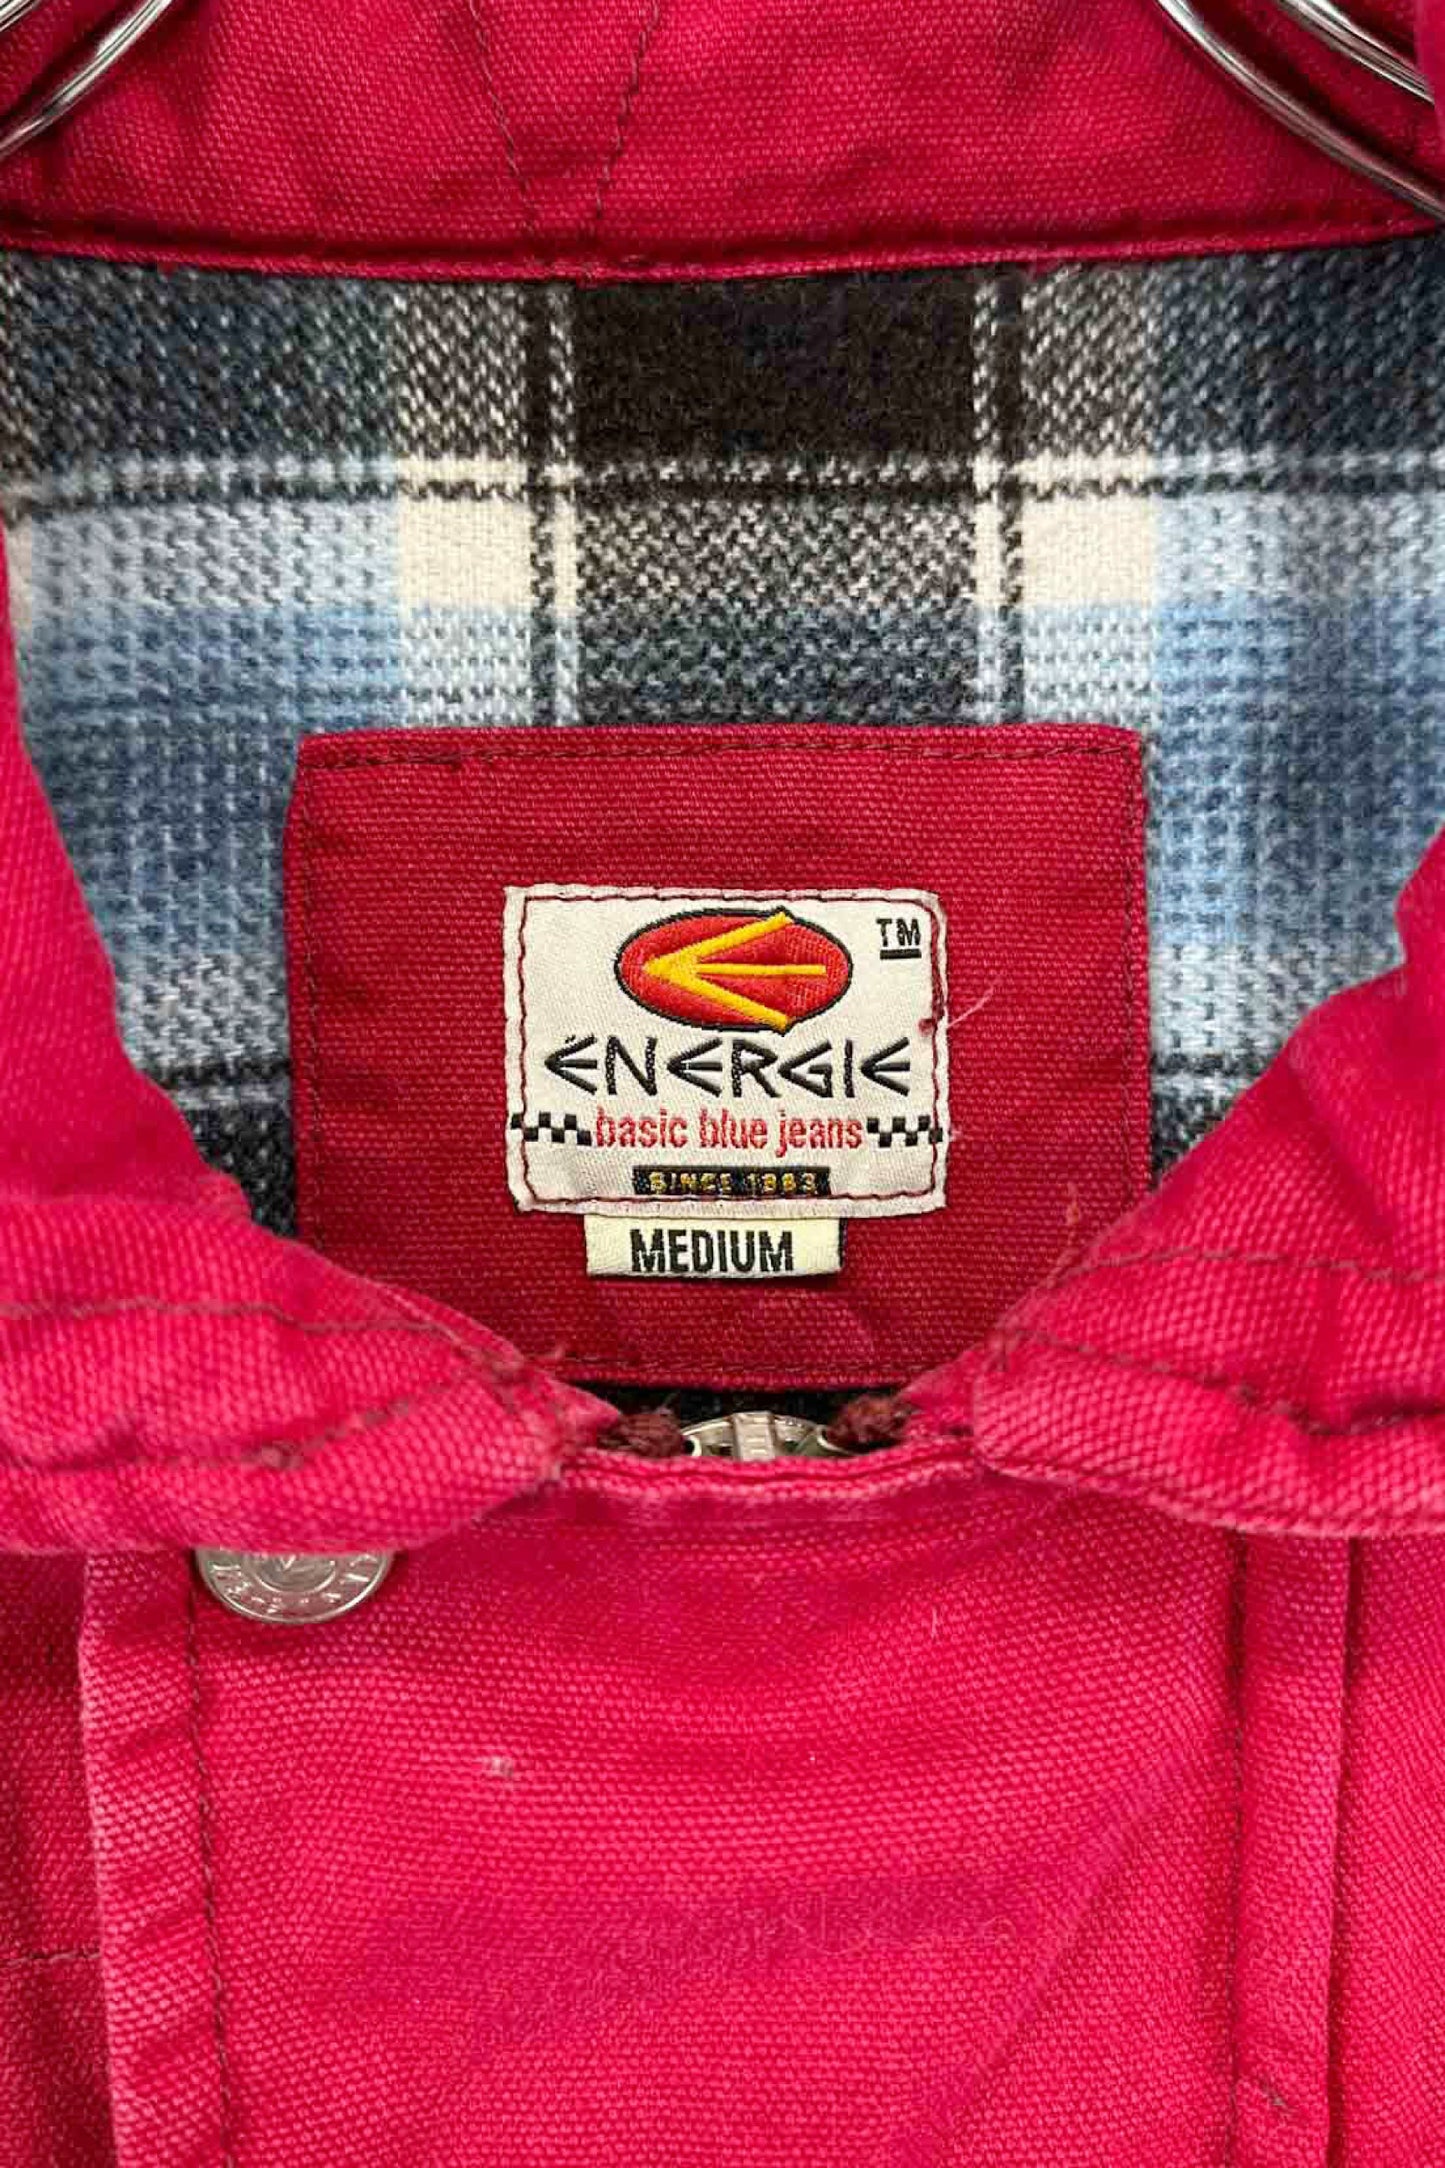 Made in ITALY ENERGIE fireman jacket